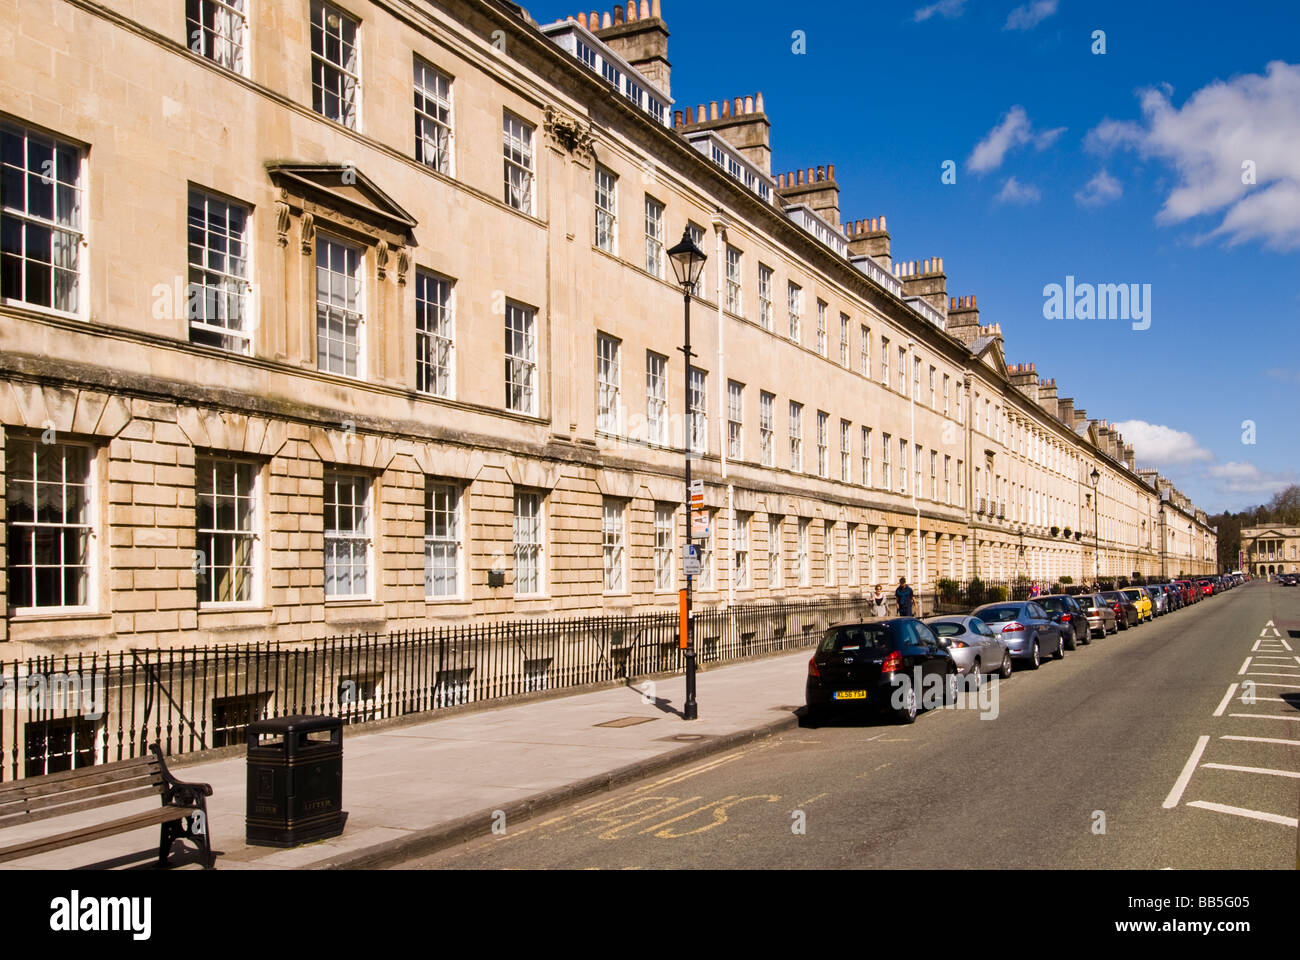 Great Pulteney Street, Bath, England, UK Banque D'Images